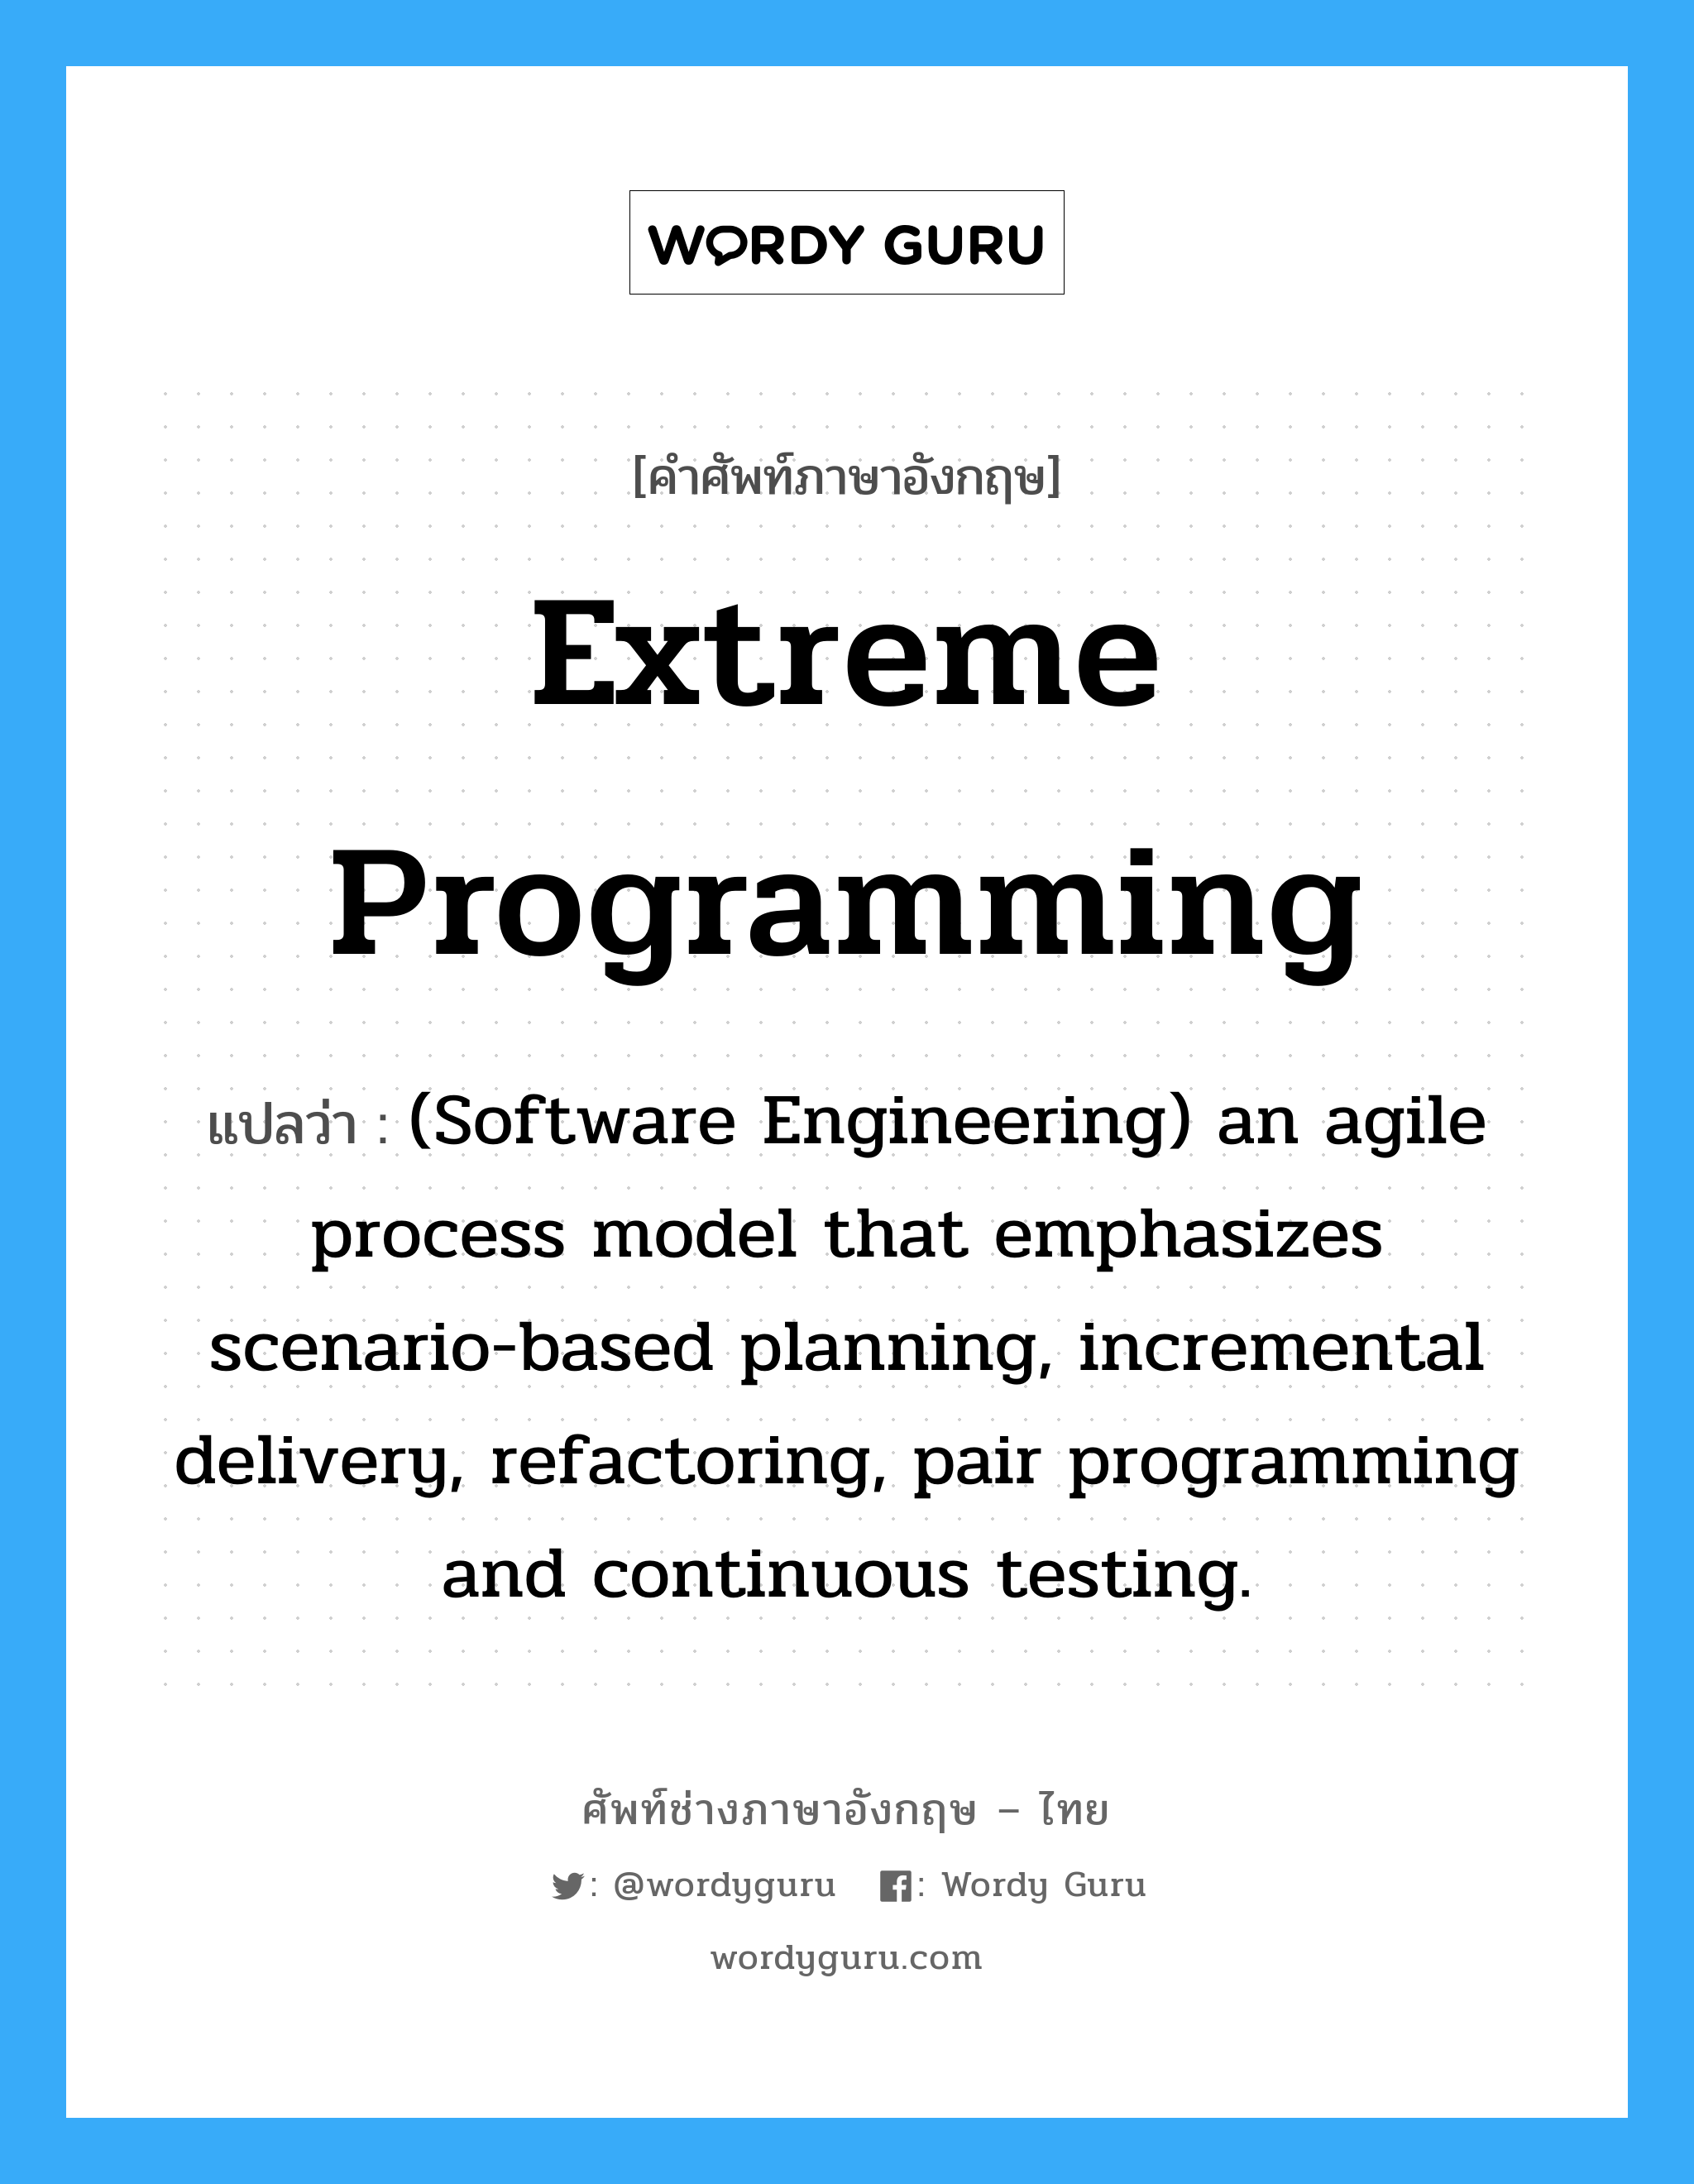 (Software Engineering) an agile process model that emphasizes scenario-based planning, incremental delivery, refactoring, pair programming and continuous testing. ภาษาอังกฤษ?, คำศัพท์ช่างภาษาอังกฤษ - ไทย (Software Engineering) an agile process model that emphasizes scenario-based planning, incremental delivery, refactoring, pair programming and continuous testing. คำศัพท์ภาษาอังกฤษ (Software Engineering) an agile process model that emphasizes scenario-based planning, incremental delivery, refactoring, pair programming and continuous testing. แปลว่า Extreme programming